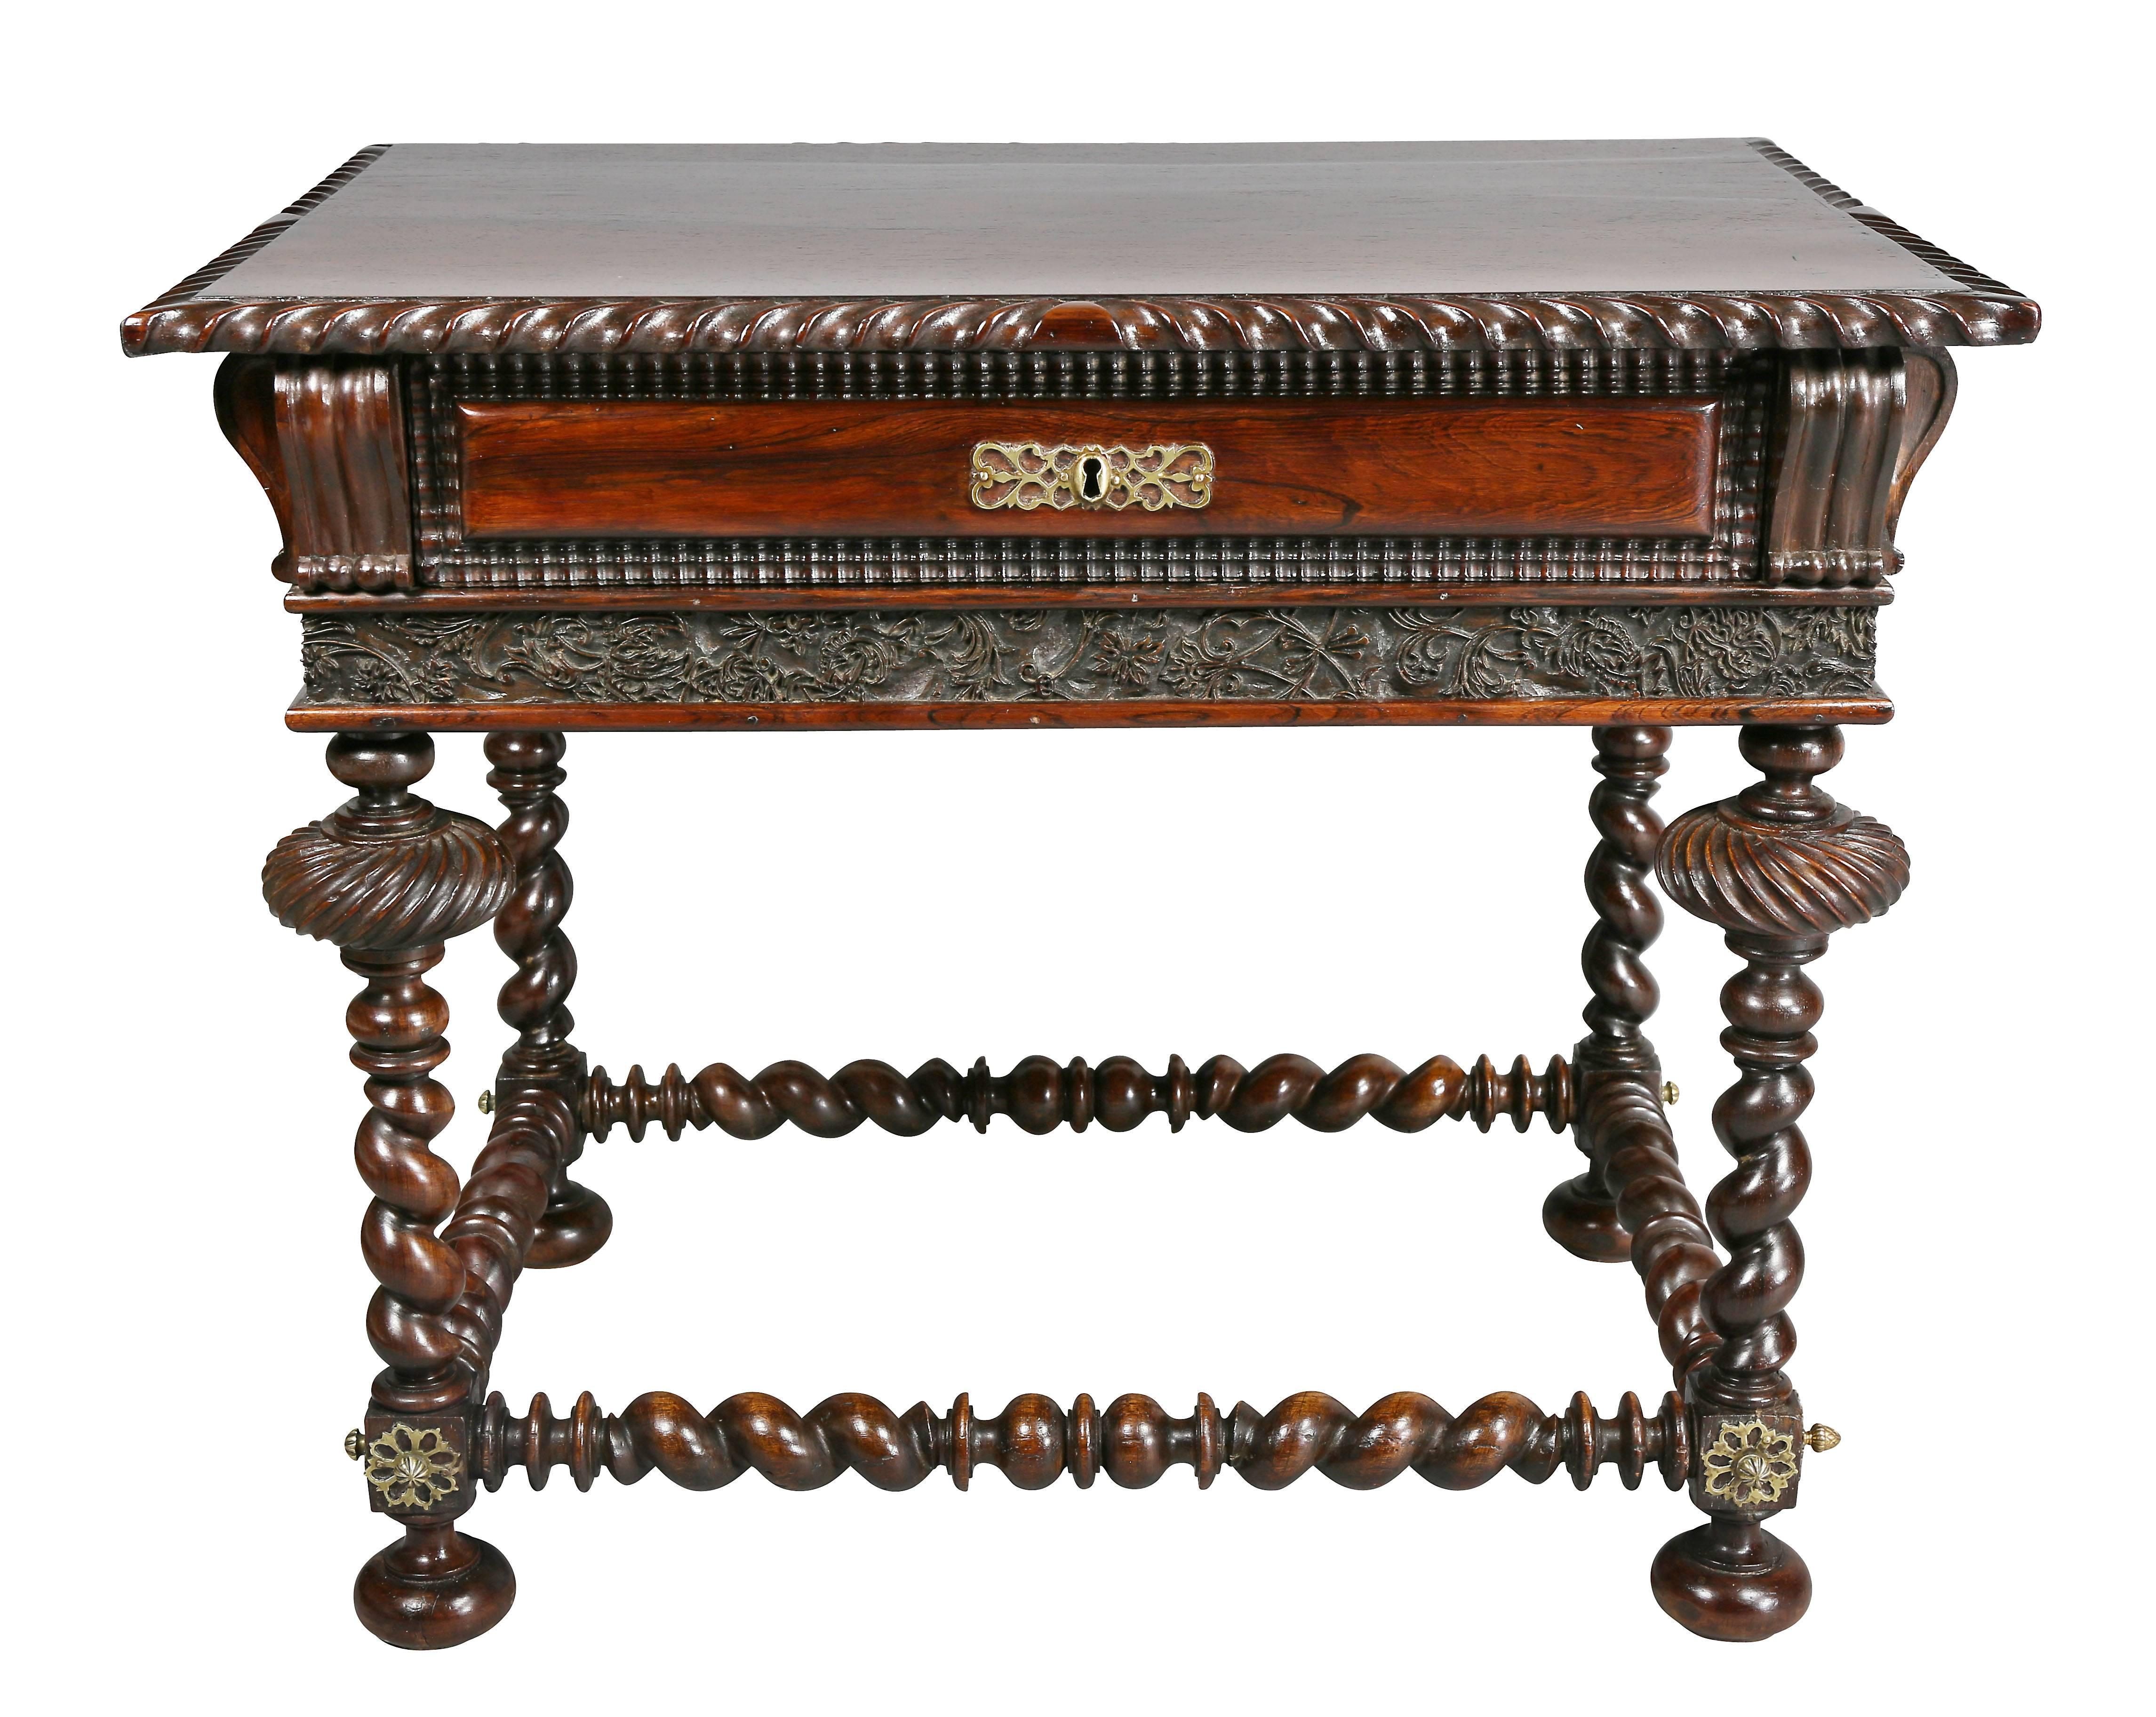 With rectangular top with gadrooned edge over a drawer with all around false drawers and carved frieze, over a carved frieze, raised on barley twist legs joined by a conforming box stretcher with brass mounts and bun feet.